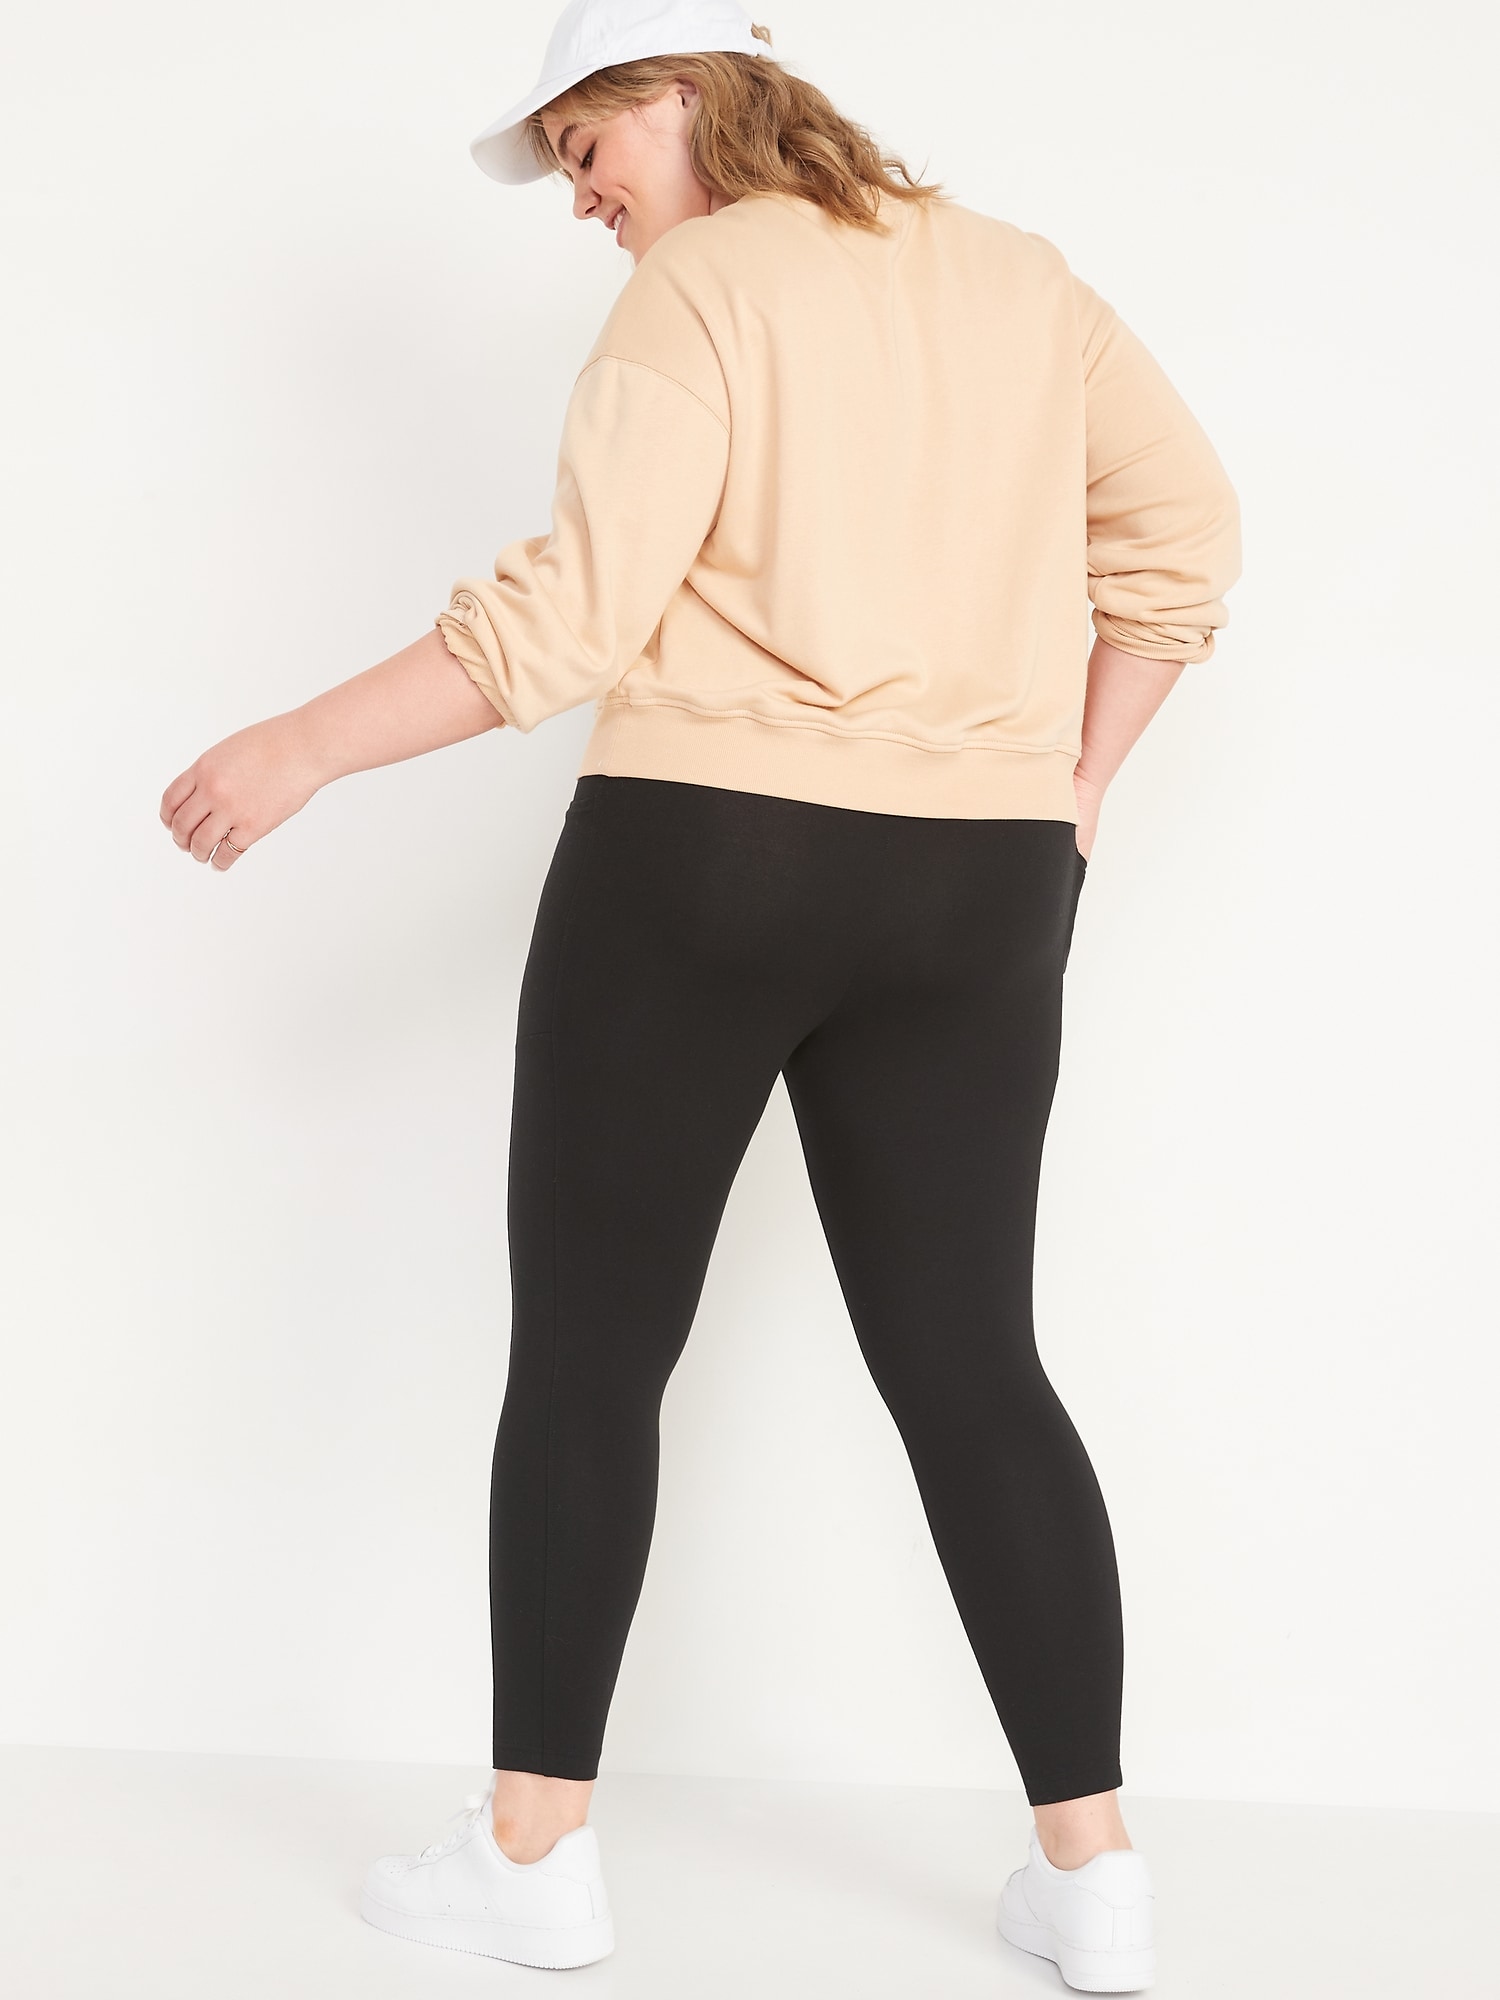  Side Pockets,Extra Tall Womens Yoga Workout Leggings Extra  Long Active Pants,34,Black,Size L